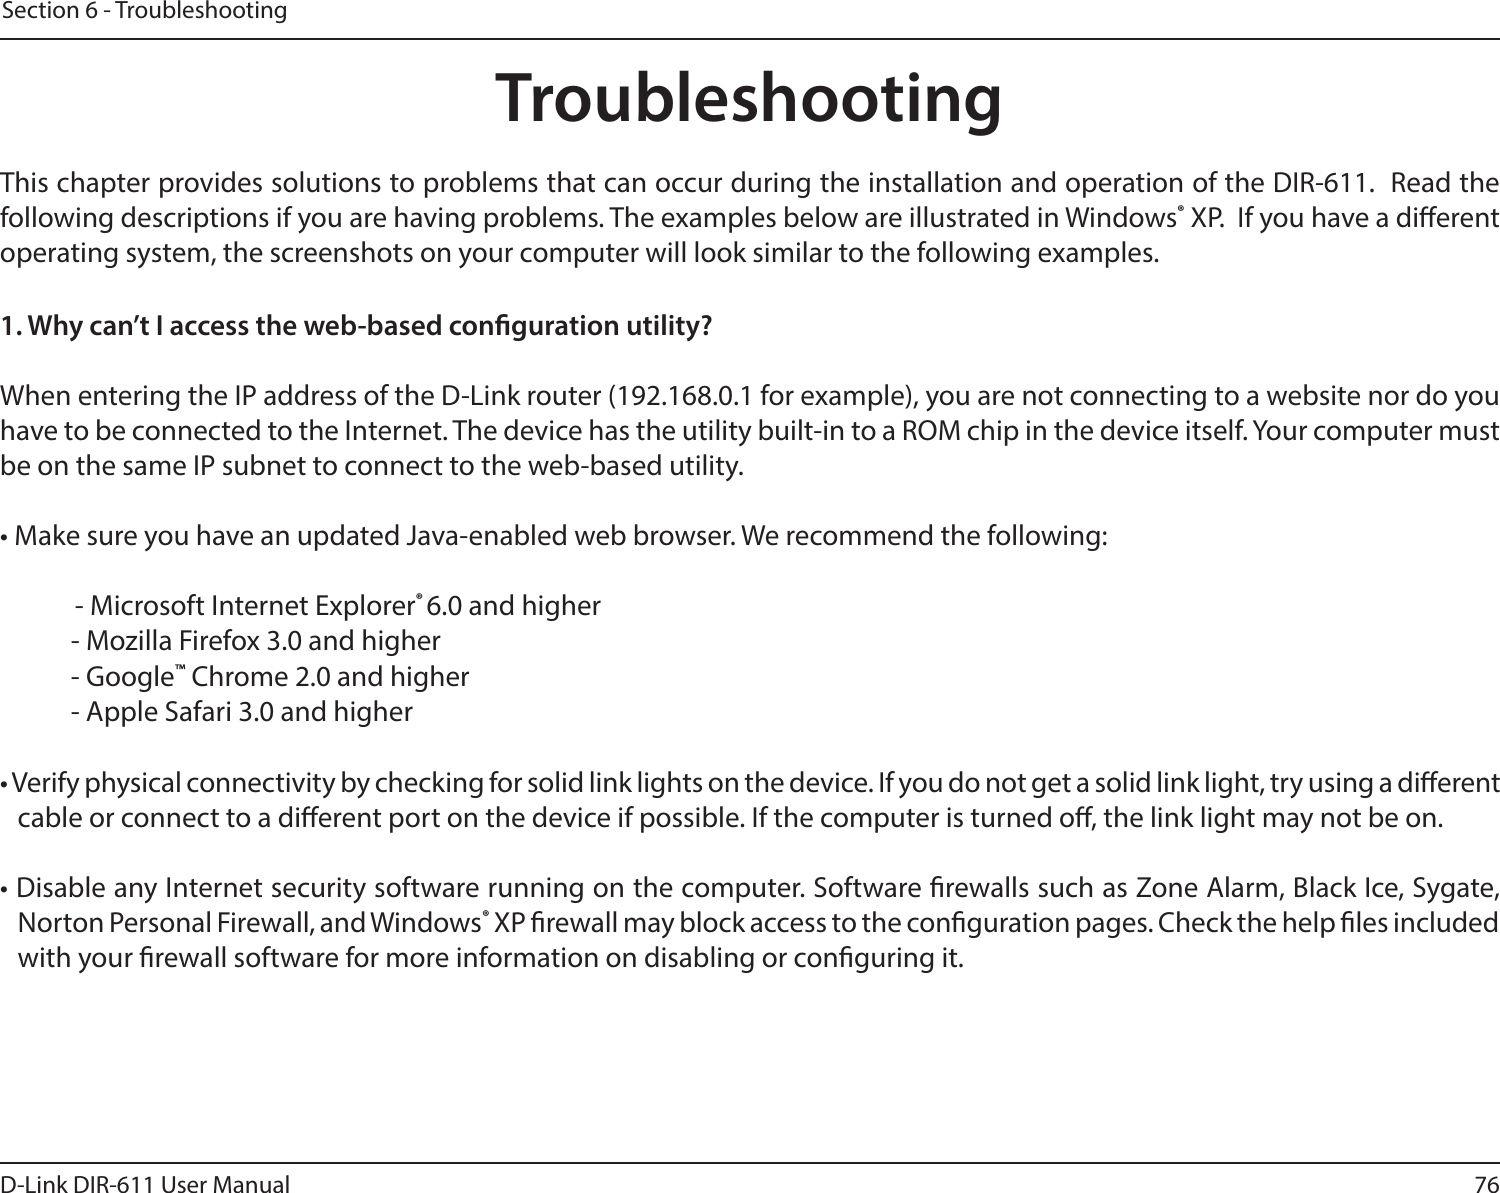 76D-Link DIR-611 User ManualSection 6 - TroubleshootingTroubleshootingThis chapter provides solutions to problems that can occur during the installation and operation of the DIR-611.  Read the following descriptions if you are having problems. The examples below are illustrated in Windows® XP.  If you have a dierent operating system, the screenshots on your computer will look similar to the following examples.1. Why can’t I access the web-based conguration utility?When entering the IP address of the D-Link router (192.168.0.1 for example), you are not connecting to a website nor do you have to be connected to the Internet. The device has the utility built-in to a ROM chip in the device itself. Your computer must be on the same IP subnet to connect to the web-based utility. • Make sure you have an updated Java-enabled web browser. We recommend the following:    - Microsoft Internet Explorer® 6.0 and higher- Mozilla Firefox 3.0 and higher- Google™ Chrome 2.0 and higher- Apple Safari 3.0 and higher• Verify physical connectivity by checking for solid link lights on the device. If you do not get a solid link light, try using a dierent cable or connect to a dierent port on the device if possible. If the computer is turned o, the link light may not be on.• Disable any Internet security software running on the computer. Software rewalls such as Zone Alarm, Black Ice, Sygate, Norton Personal Firewall, and Windows® XP rewall may block access to the conguration pages. Check the help les included with your rewall software for more information on disabling or conguring it.